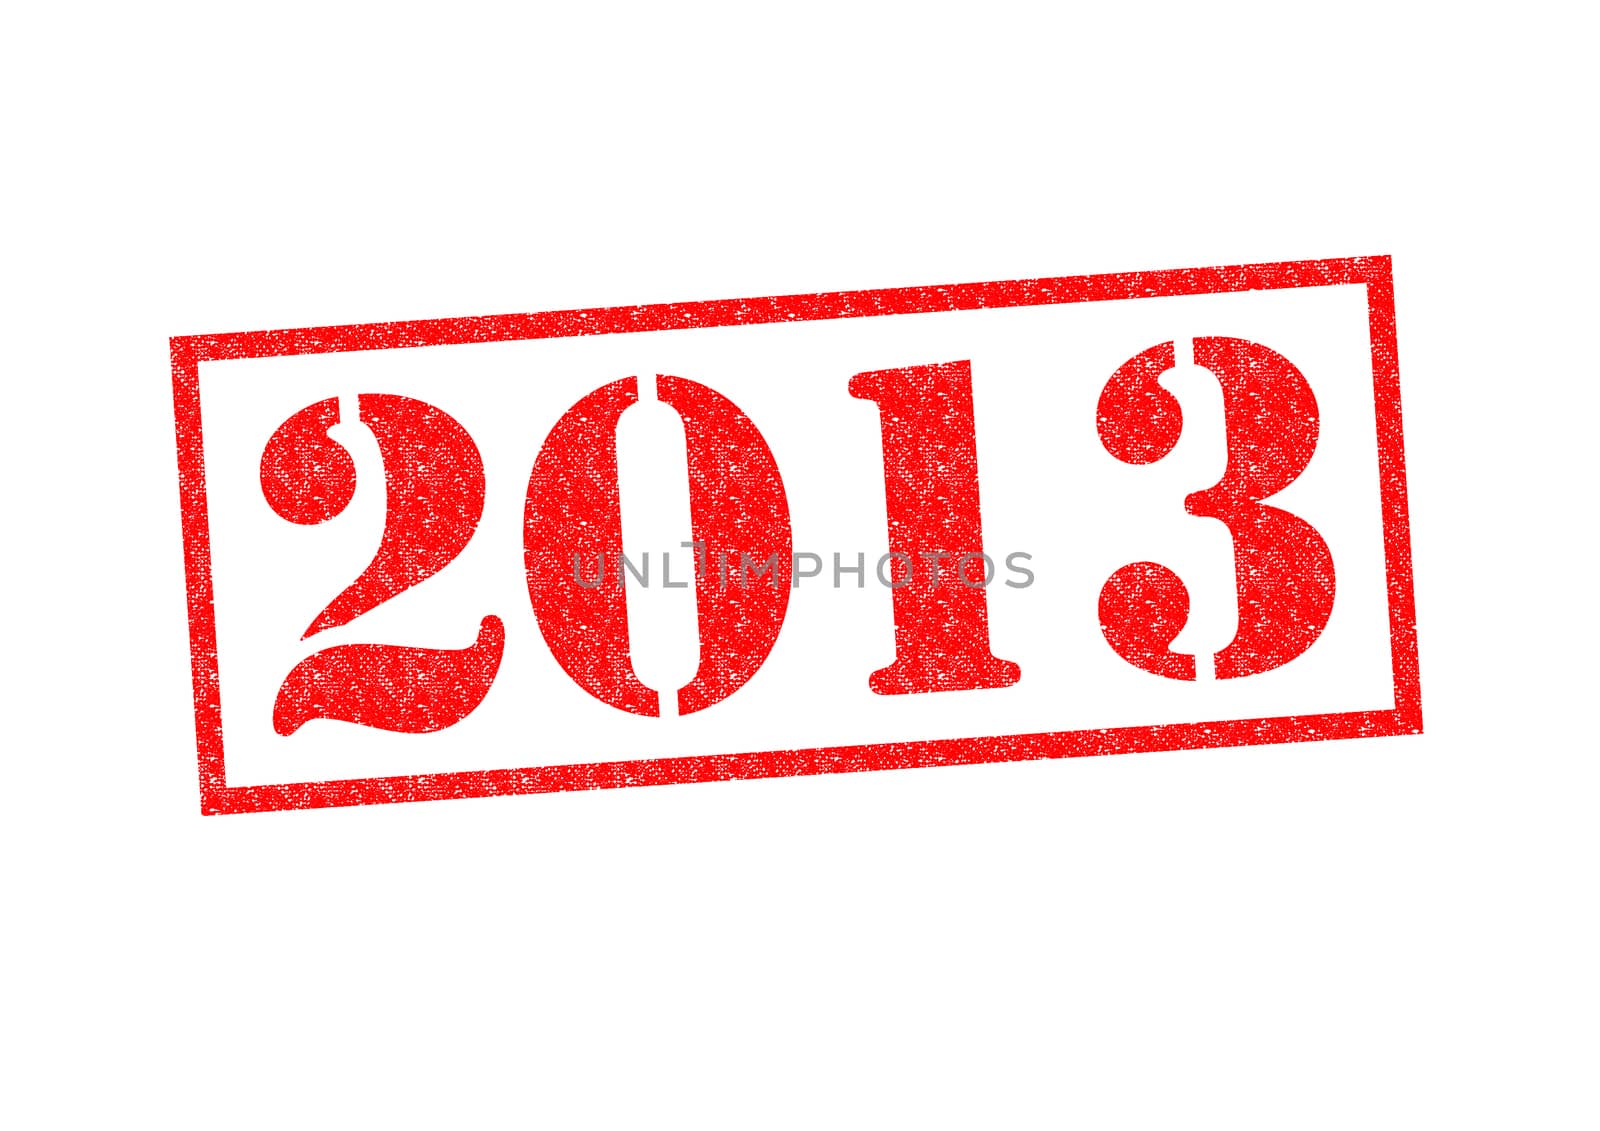 2013 Rubber Stamp over a white background.